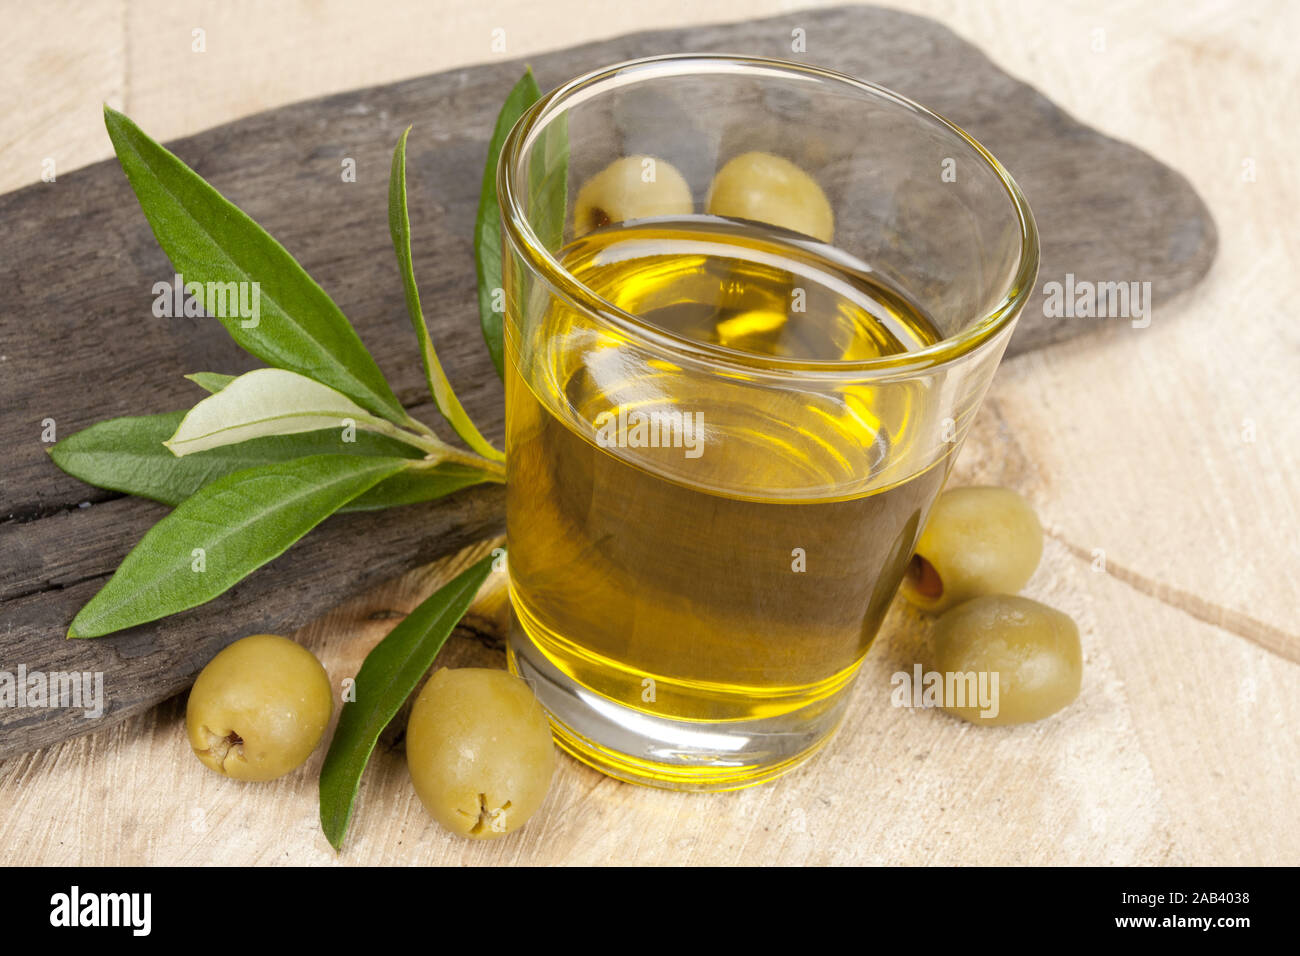 Glas mit Olivenoel und Oliven |Glass with olive oil and olives| Stock Photo  - Alamy